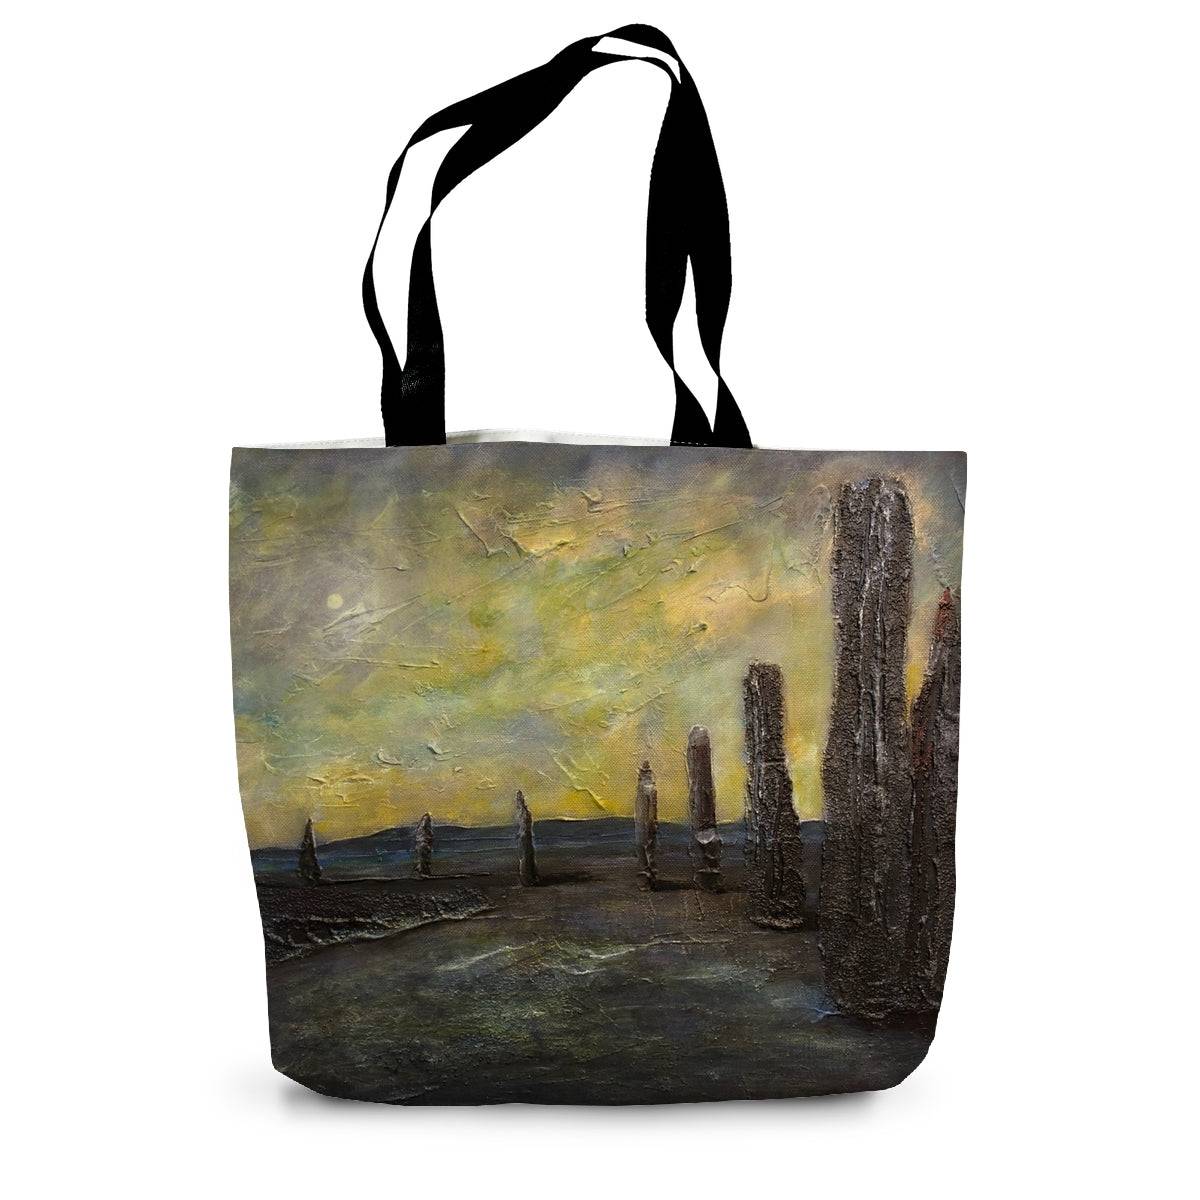 An Ethereal Ring Of Brodgar Art Gifts Canvas Tote Bag-Bags-Orkney Art Gallery-14"x18.5"-Paintings, Prints, Homeware, Art Gifts From Scotland By Scottish Artist Kevin Hunter